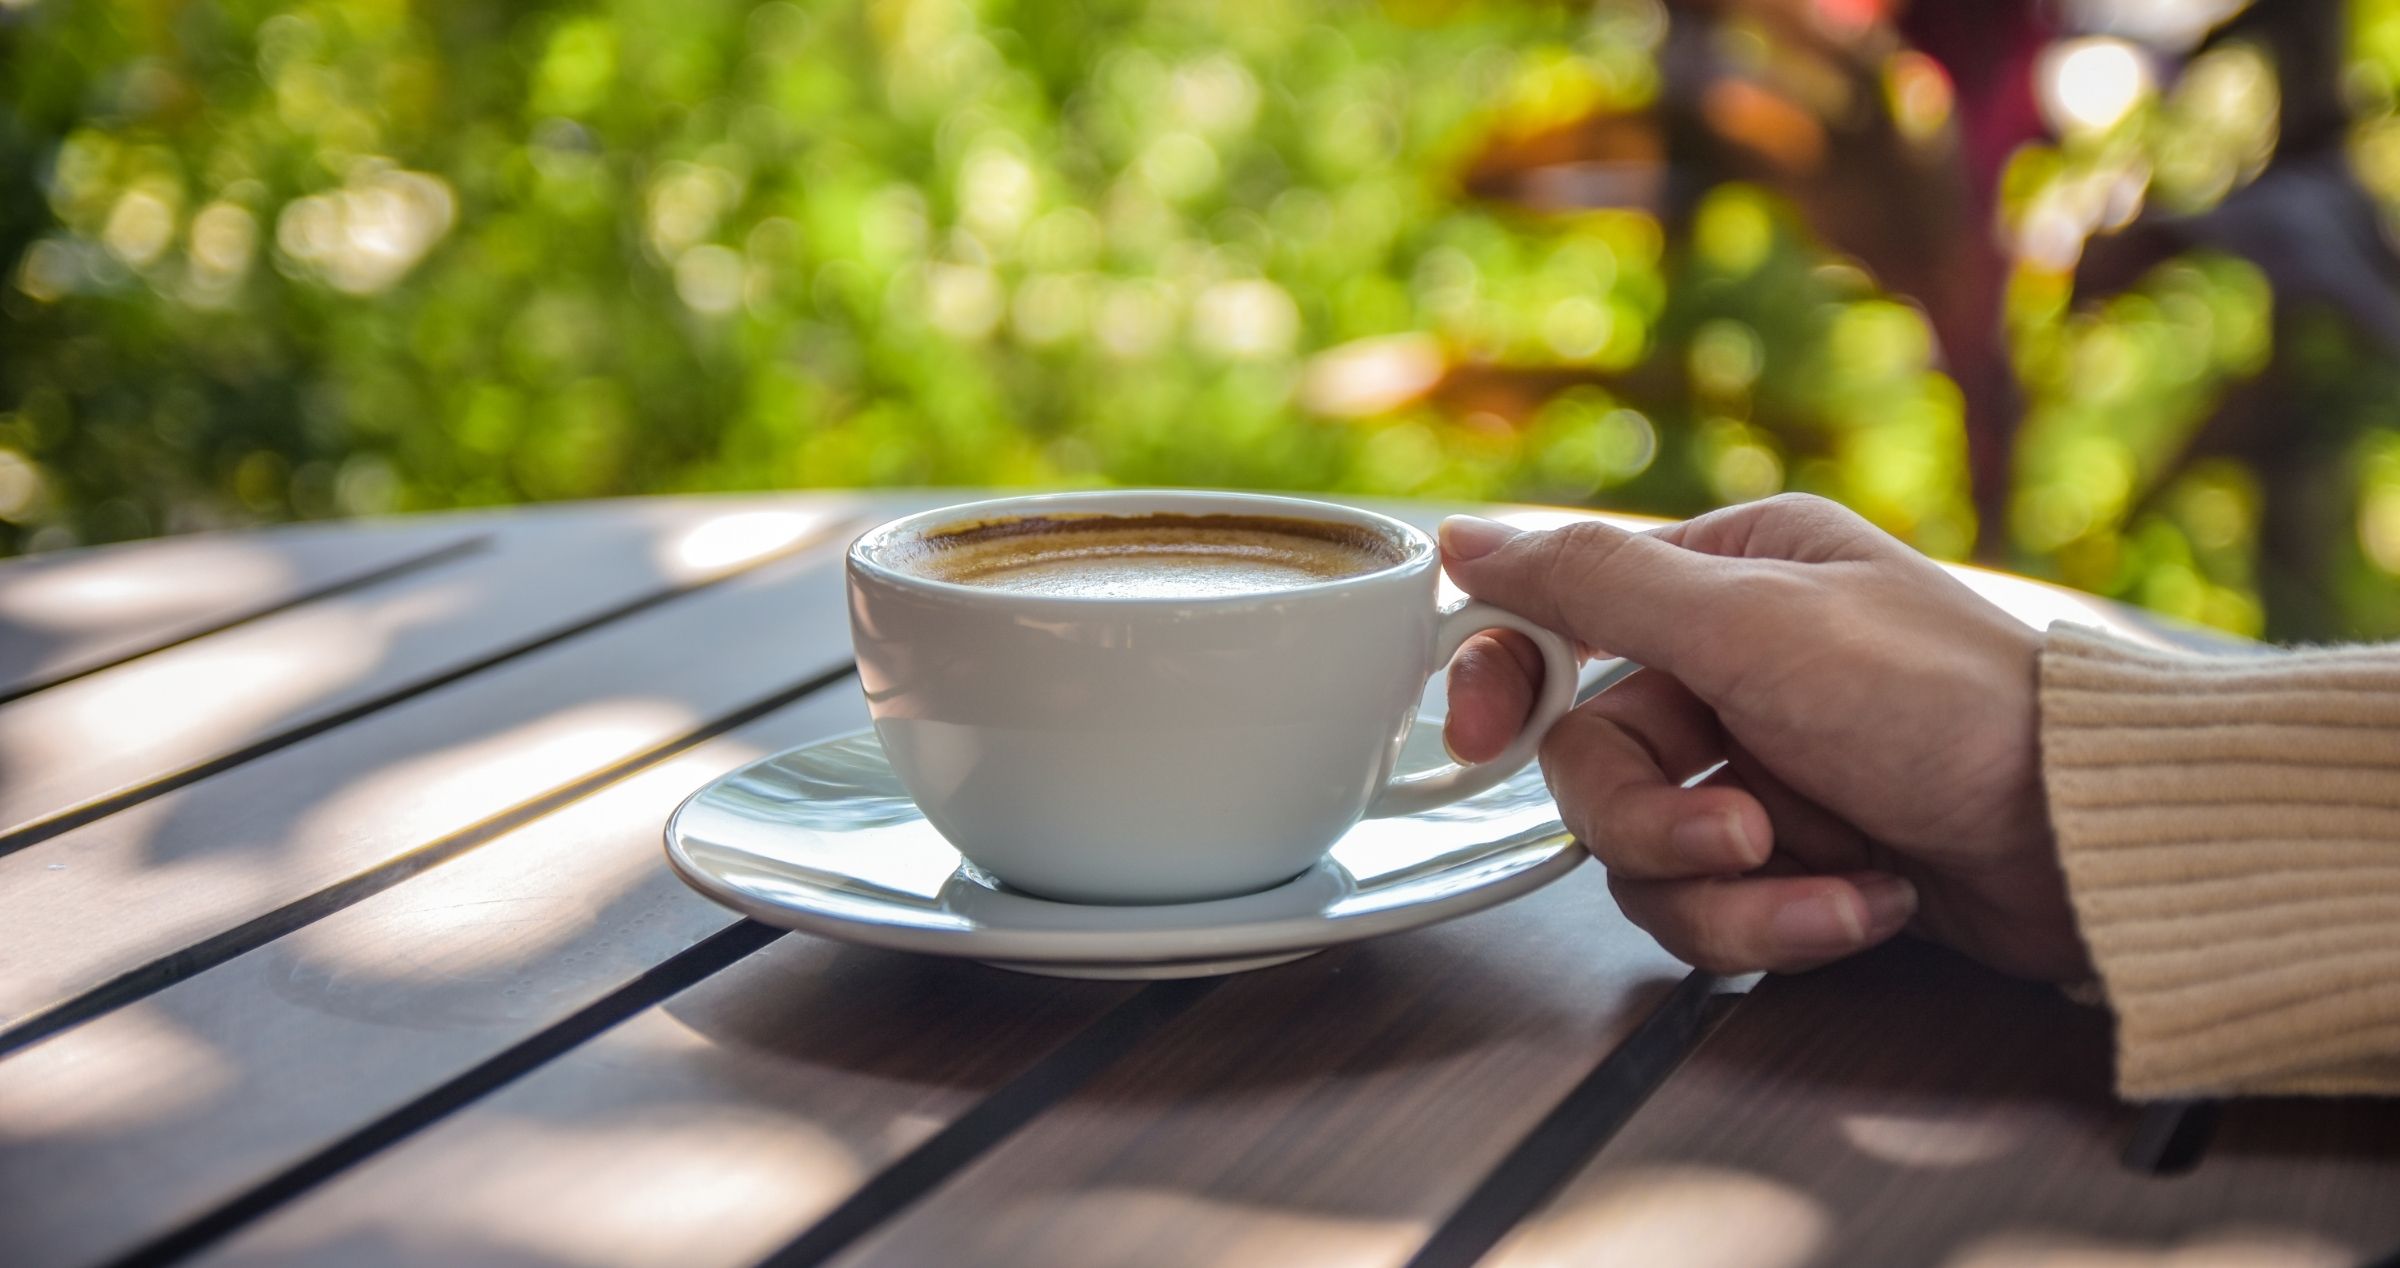 Hand holding cup of coffee in sunny green garden